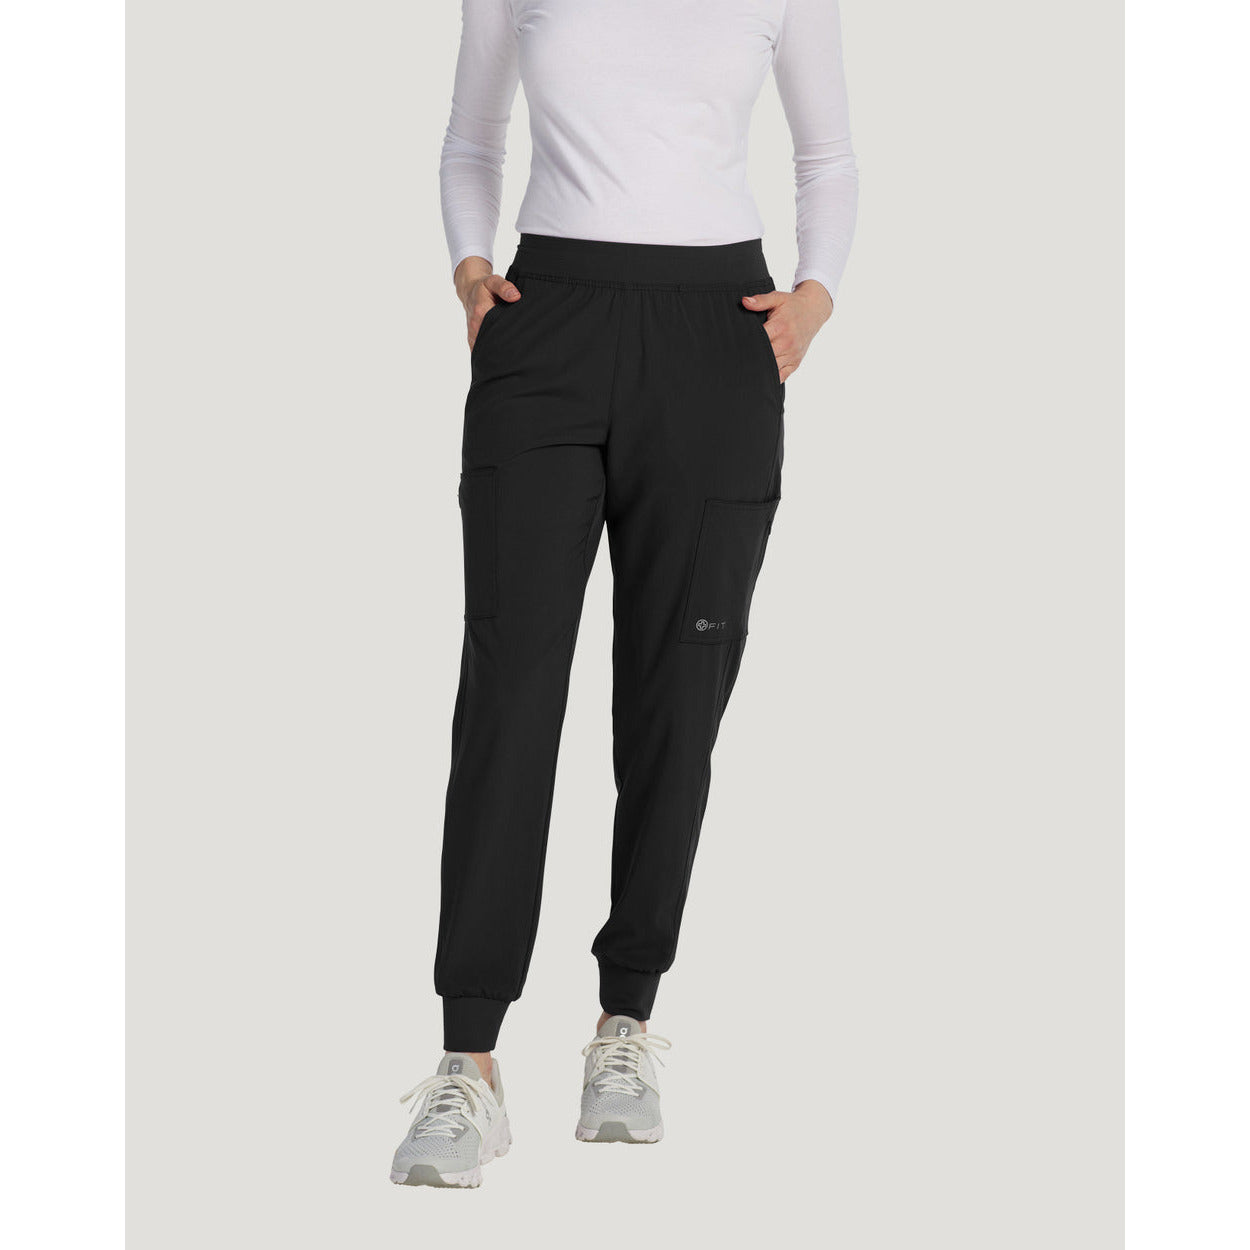 Scrub Jogger Pants by WhiteCross Fit on SALE (364)